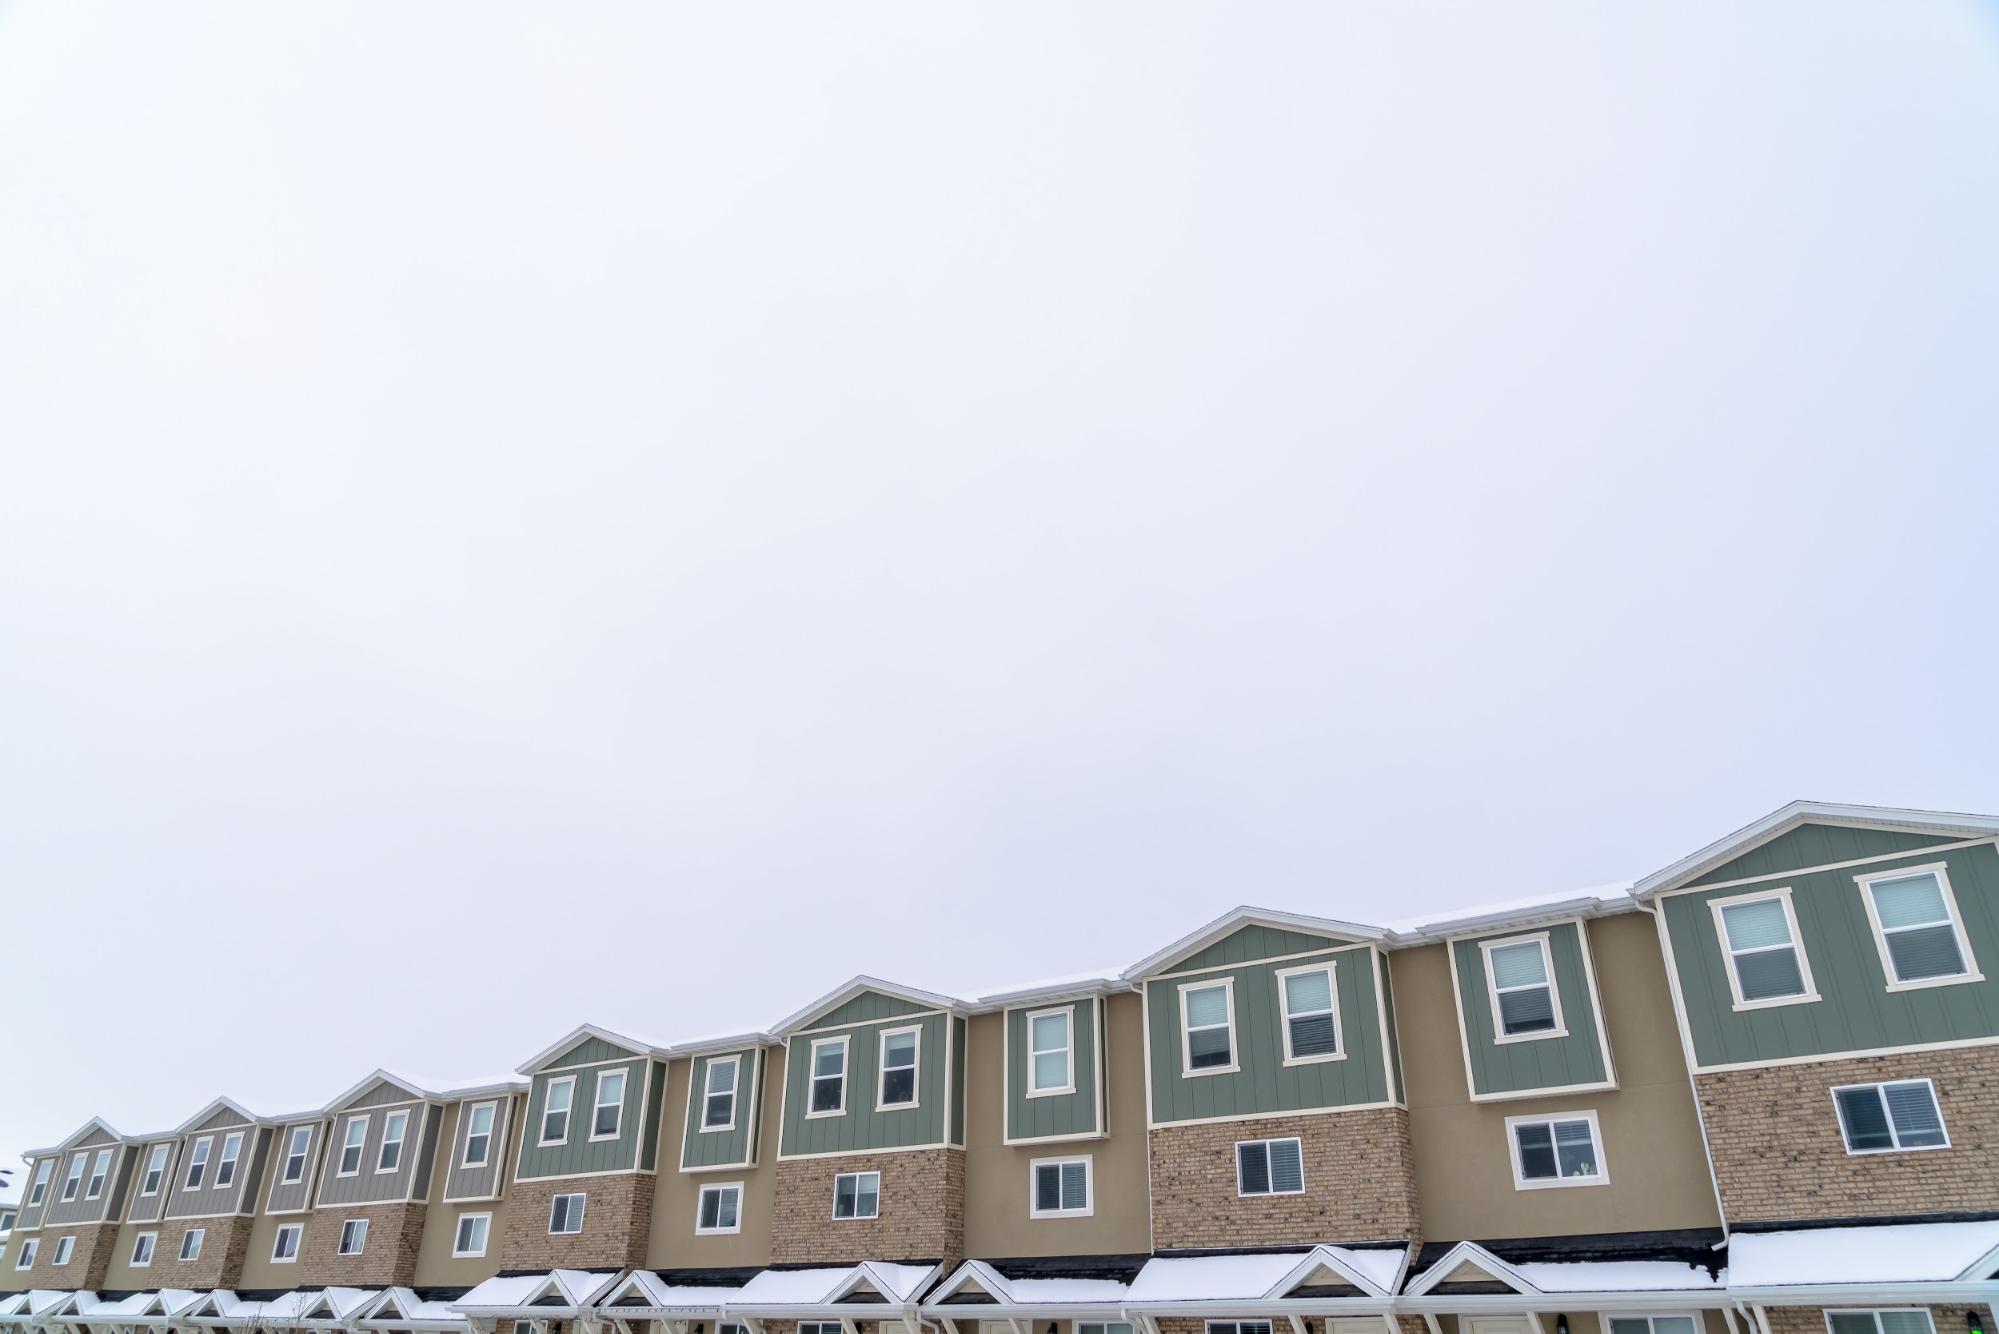 A line of townhouses lined up against a grey sky